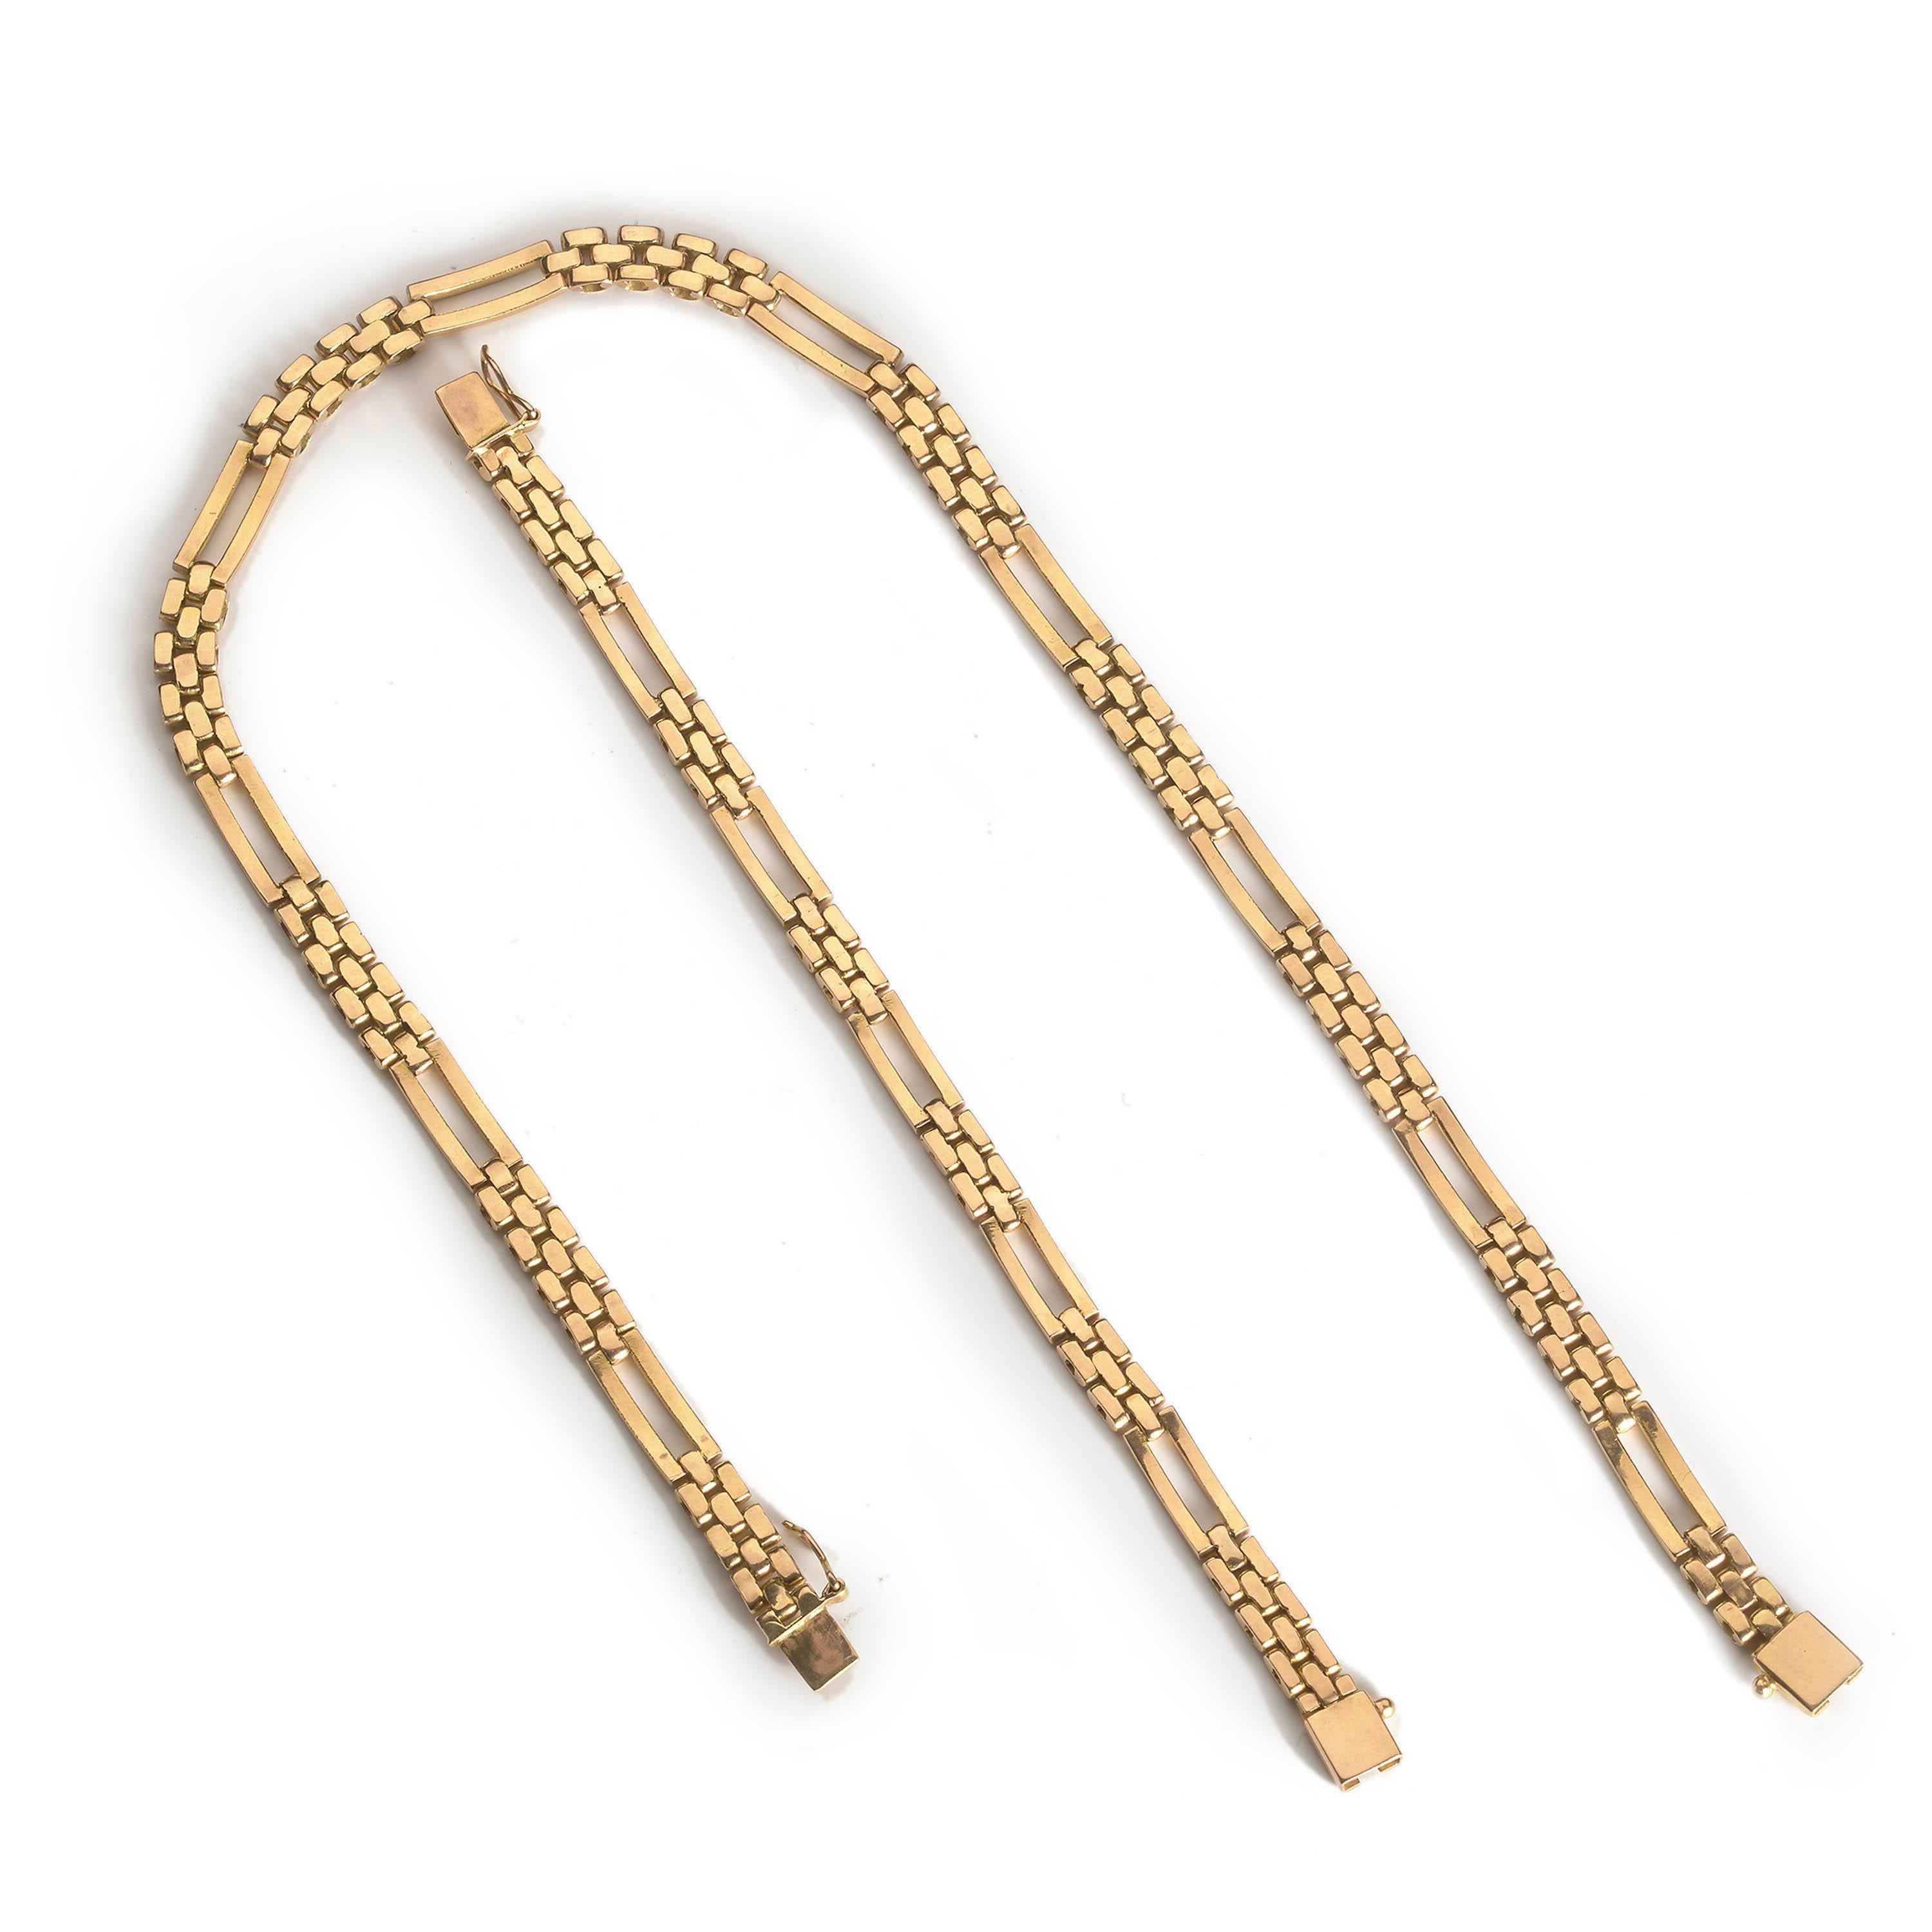 A matching gold suite consisting of a necklace and bracelet, made up of brick-links and elongated open panel links, mounted in 18ct yellow gold. Of European origin, circa 1980.

Bracelet length: 6 ¾